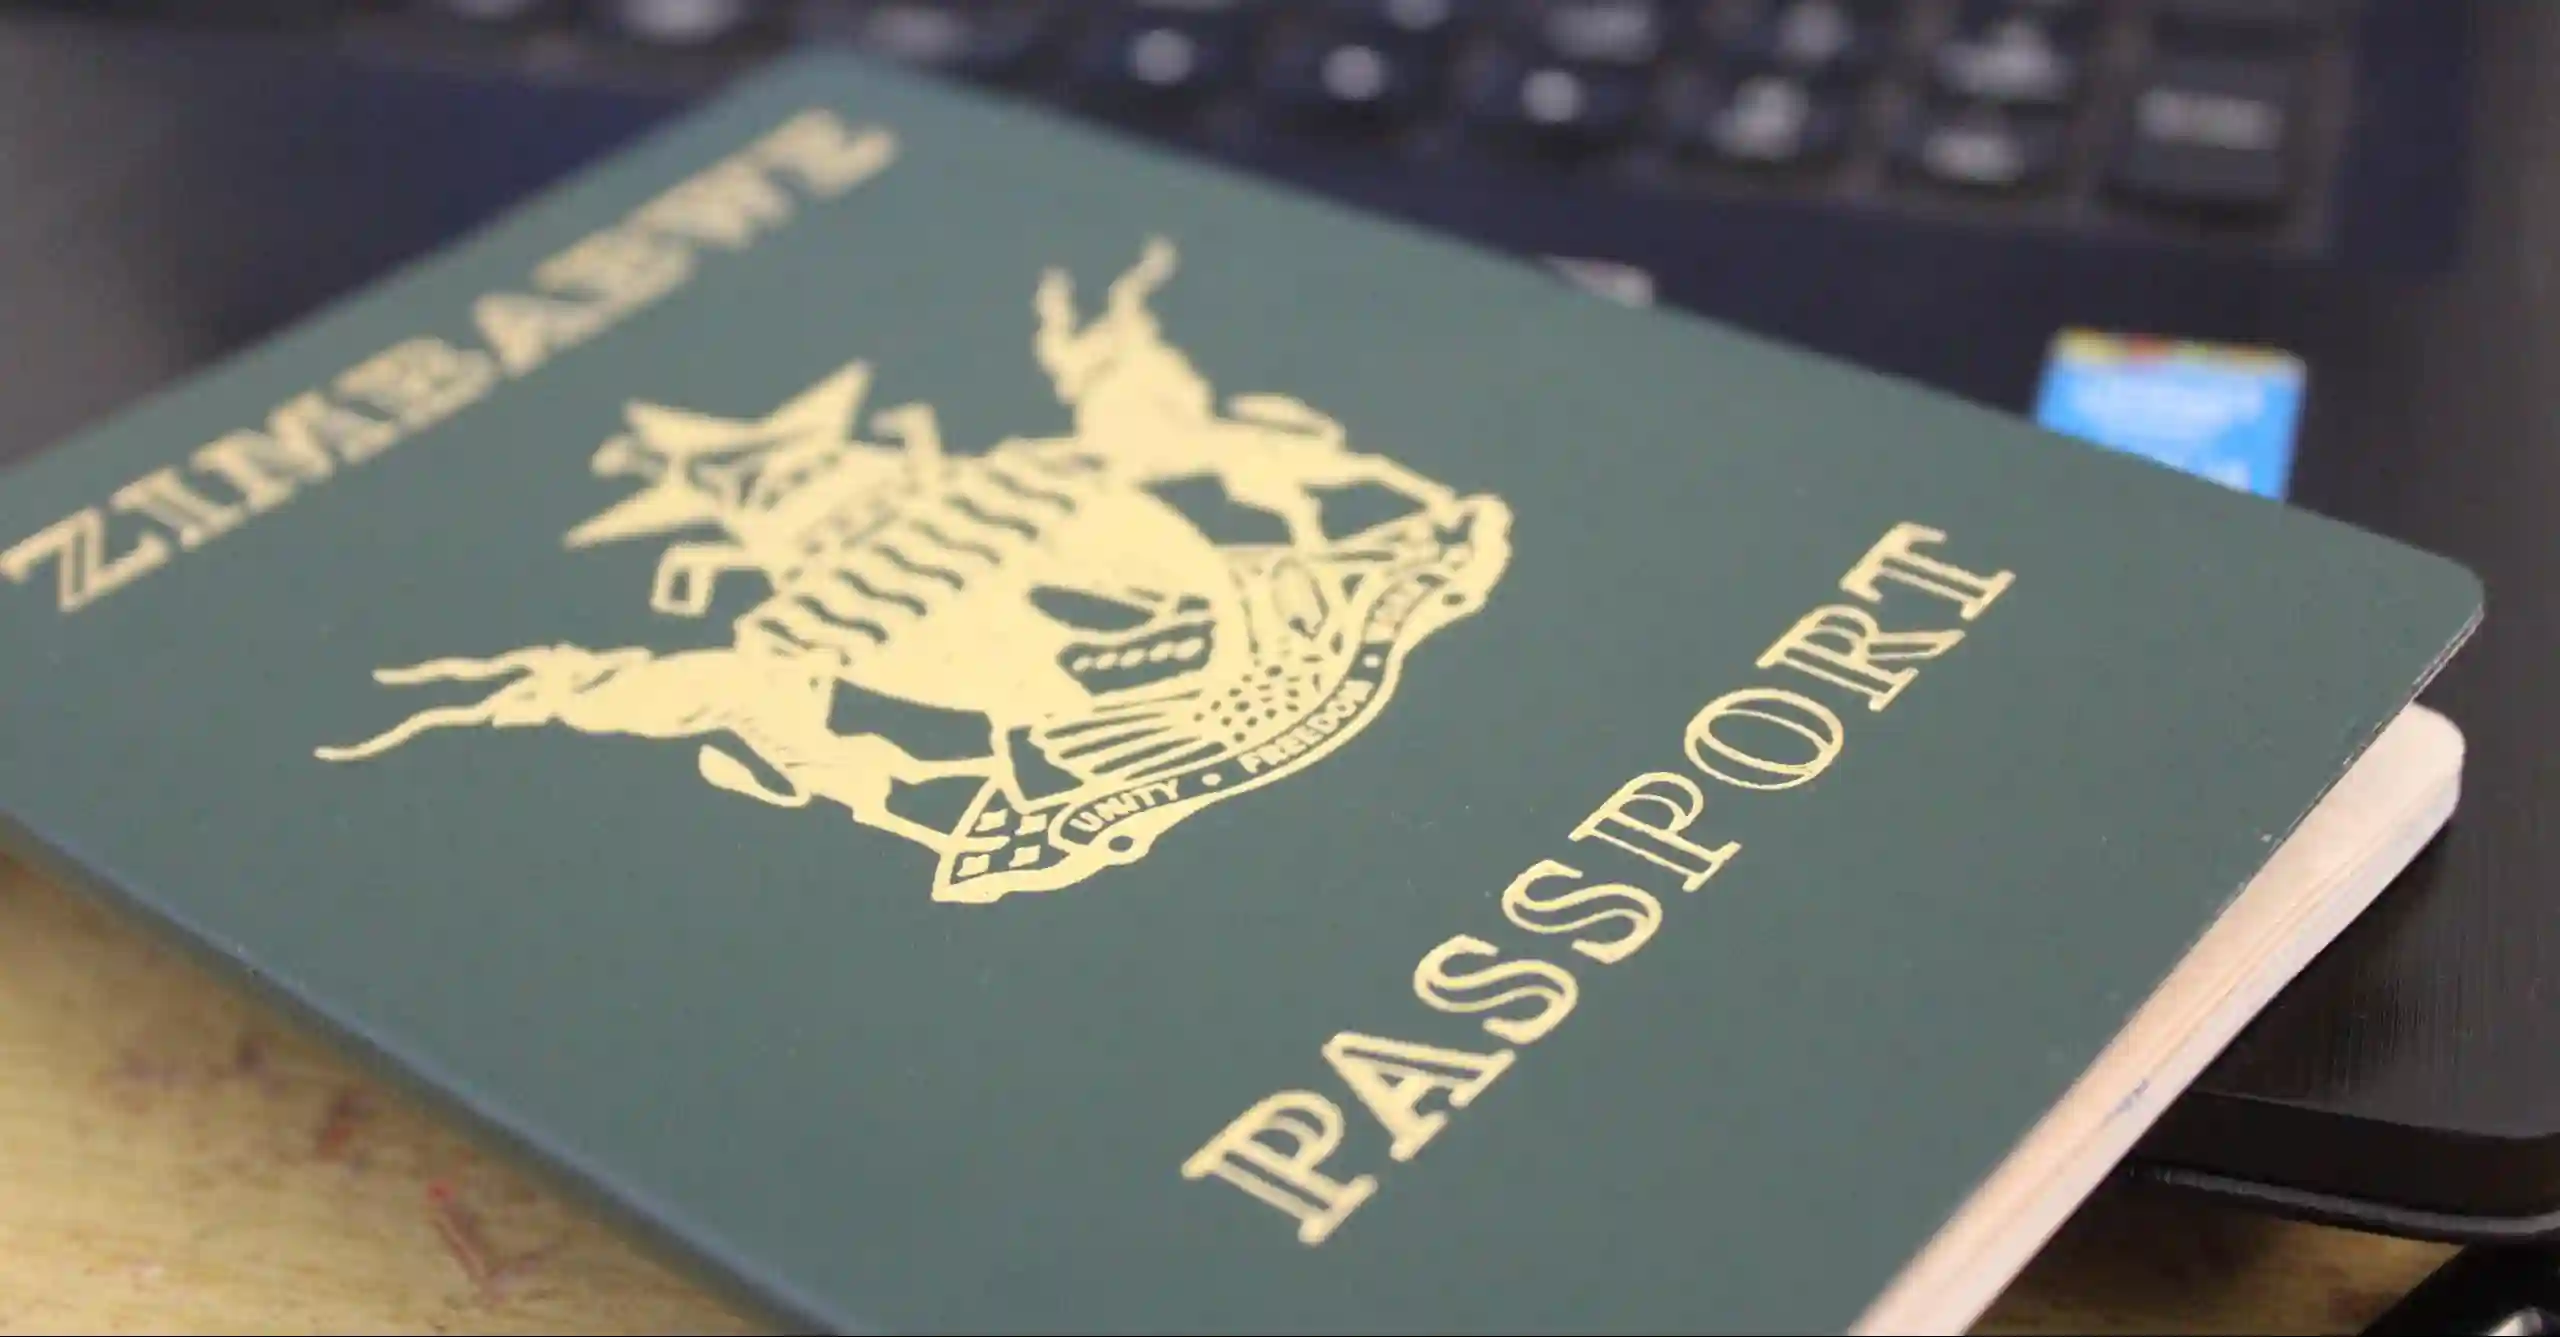 Zimbabwe Commences Trial Run Of Electronic Passport Processing Centre In Joburg